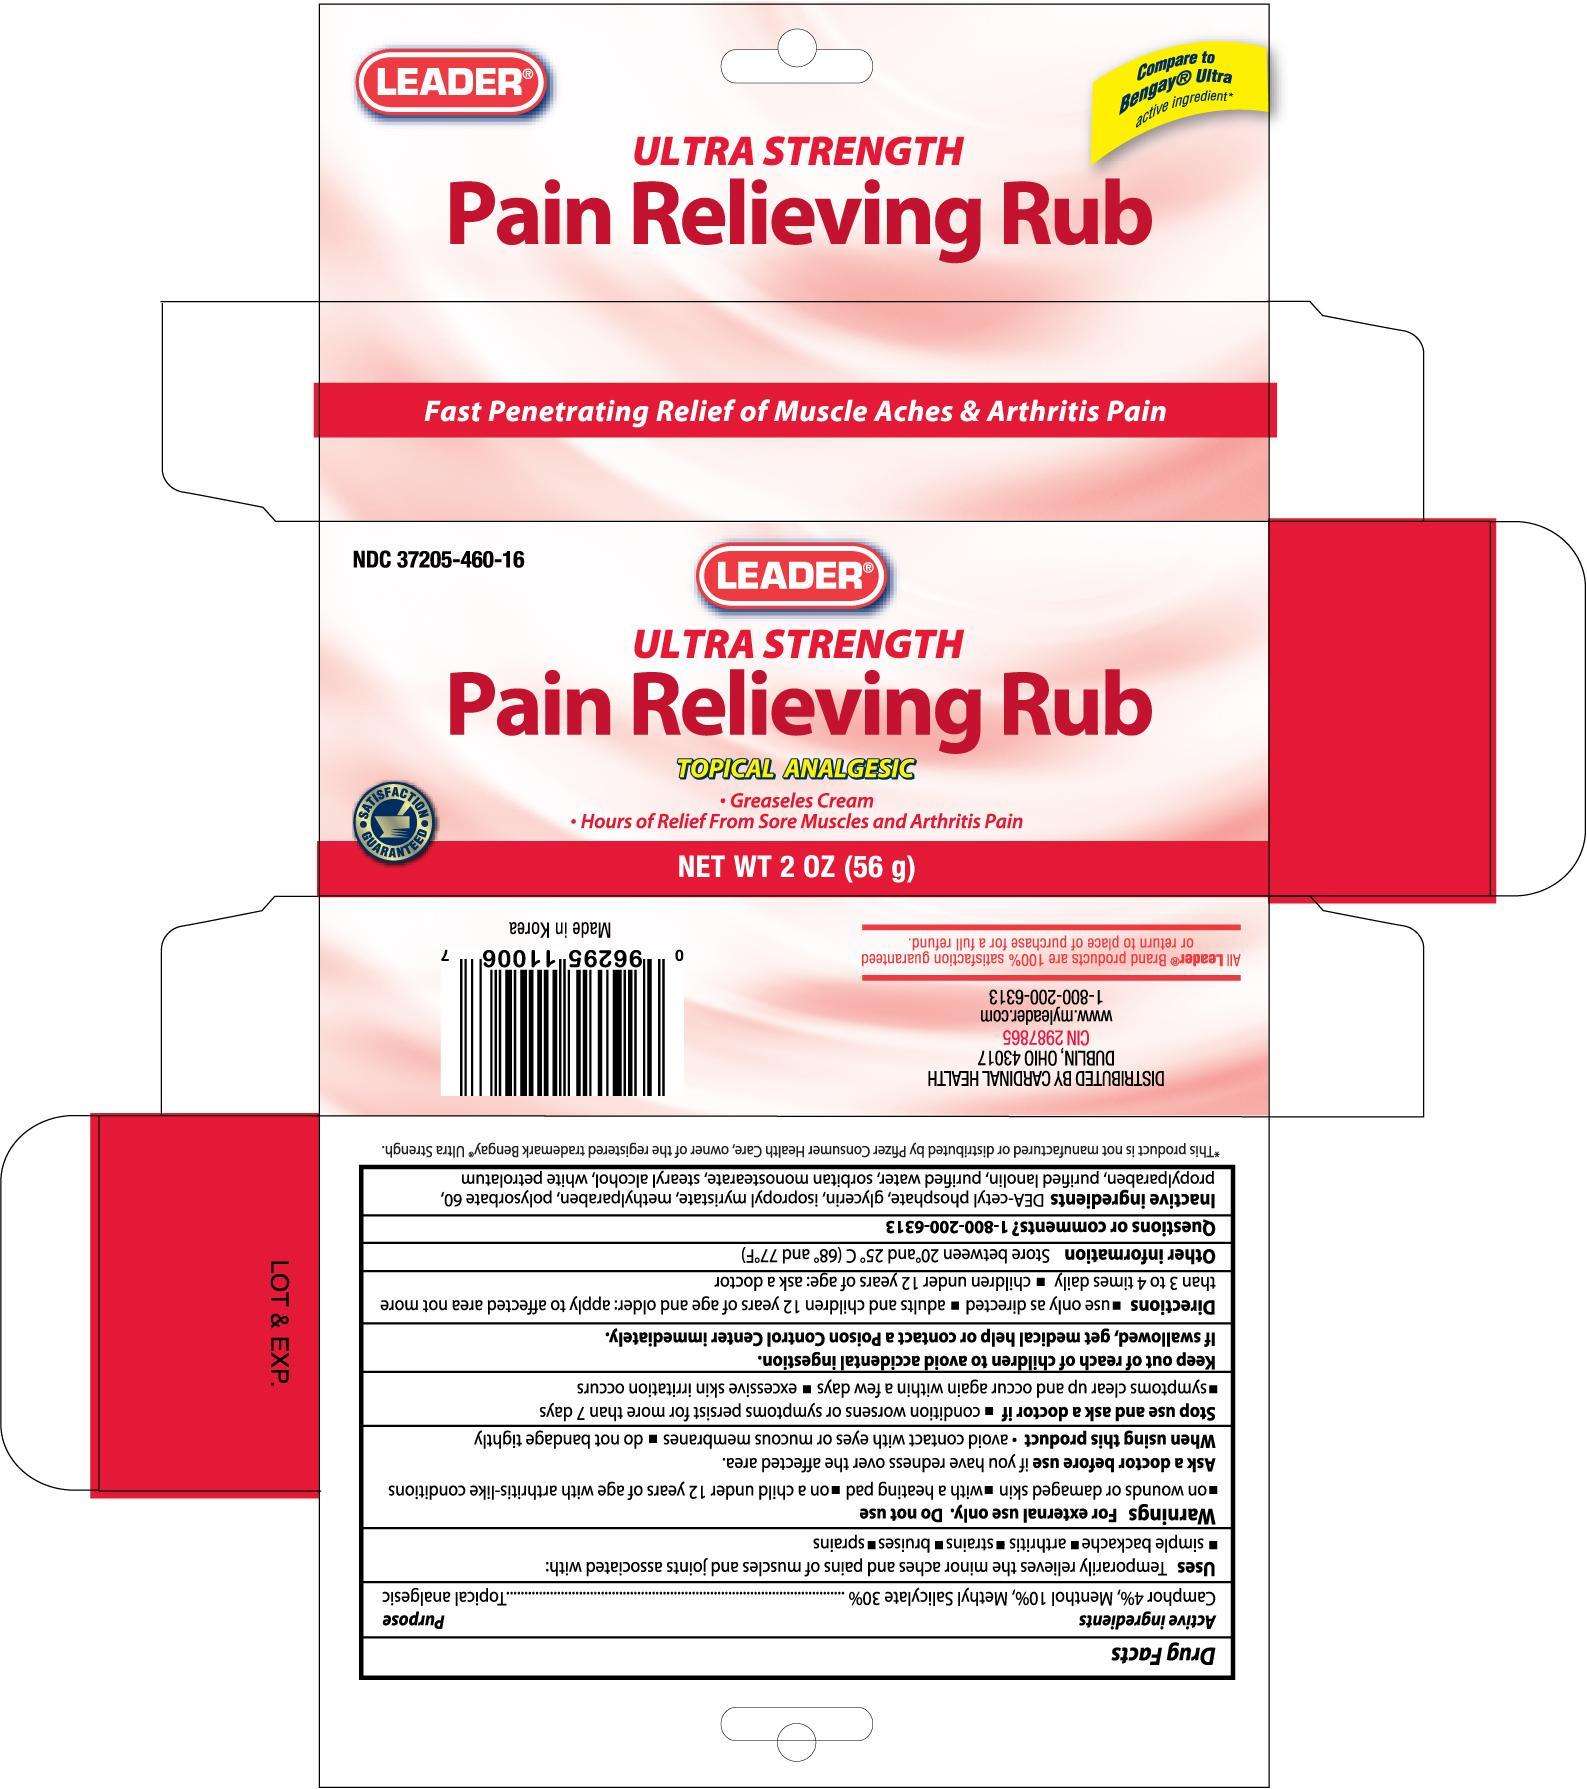 LEADER PAIN RELIEVING RUB ULTRA